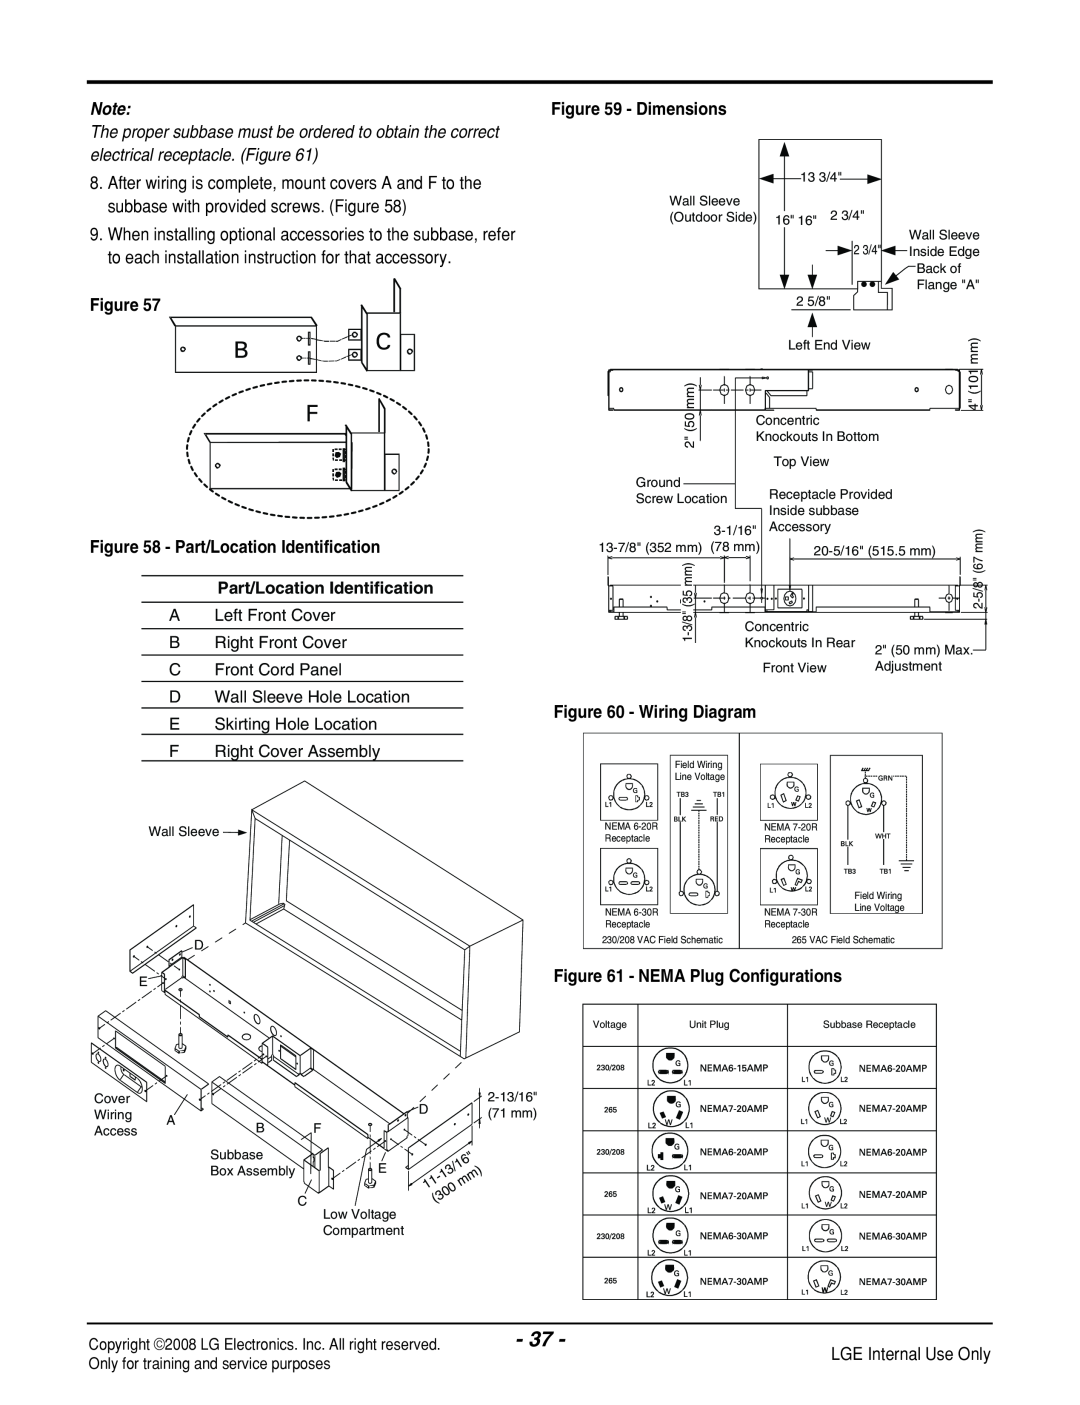 LG Electronics LP121CEM-Y8 manual Dimensions, The proper subbase must be ordered to obtain the correct, Wiring Diagram 